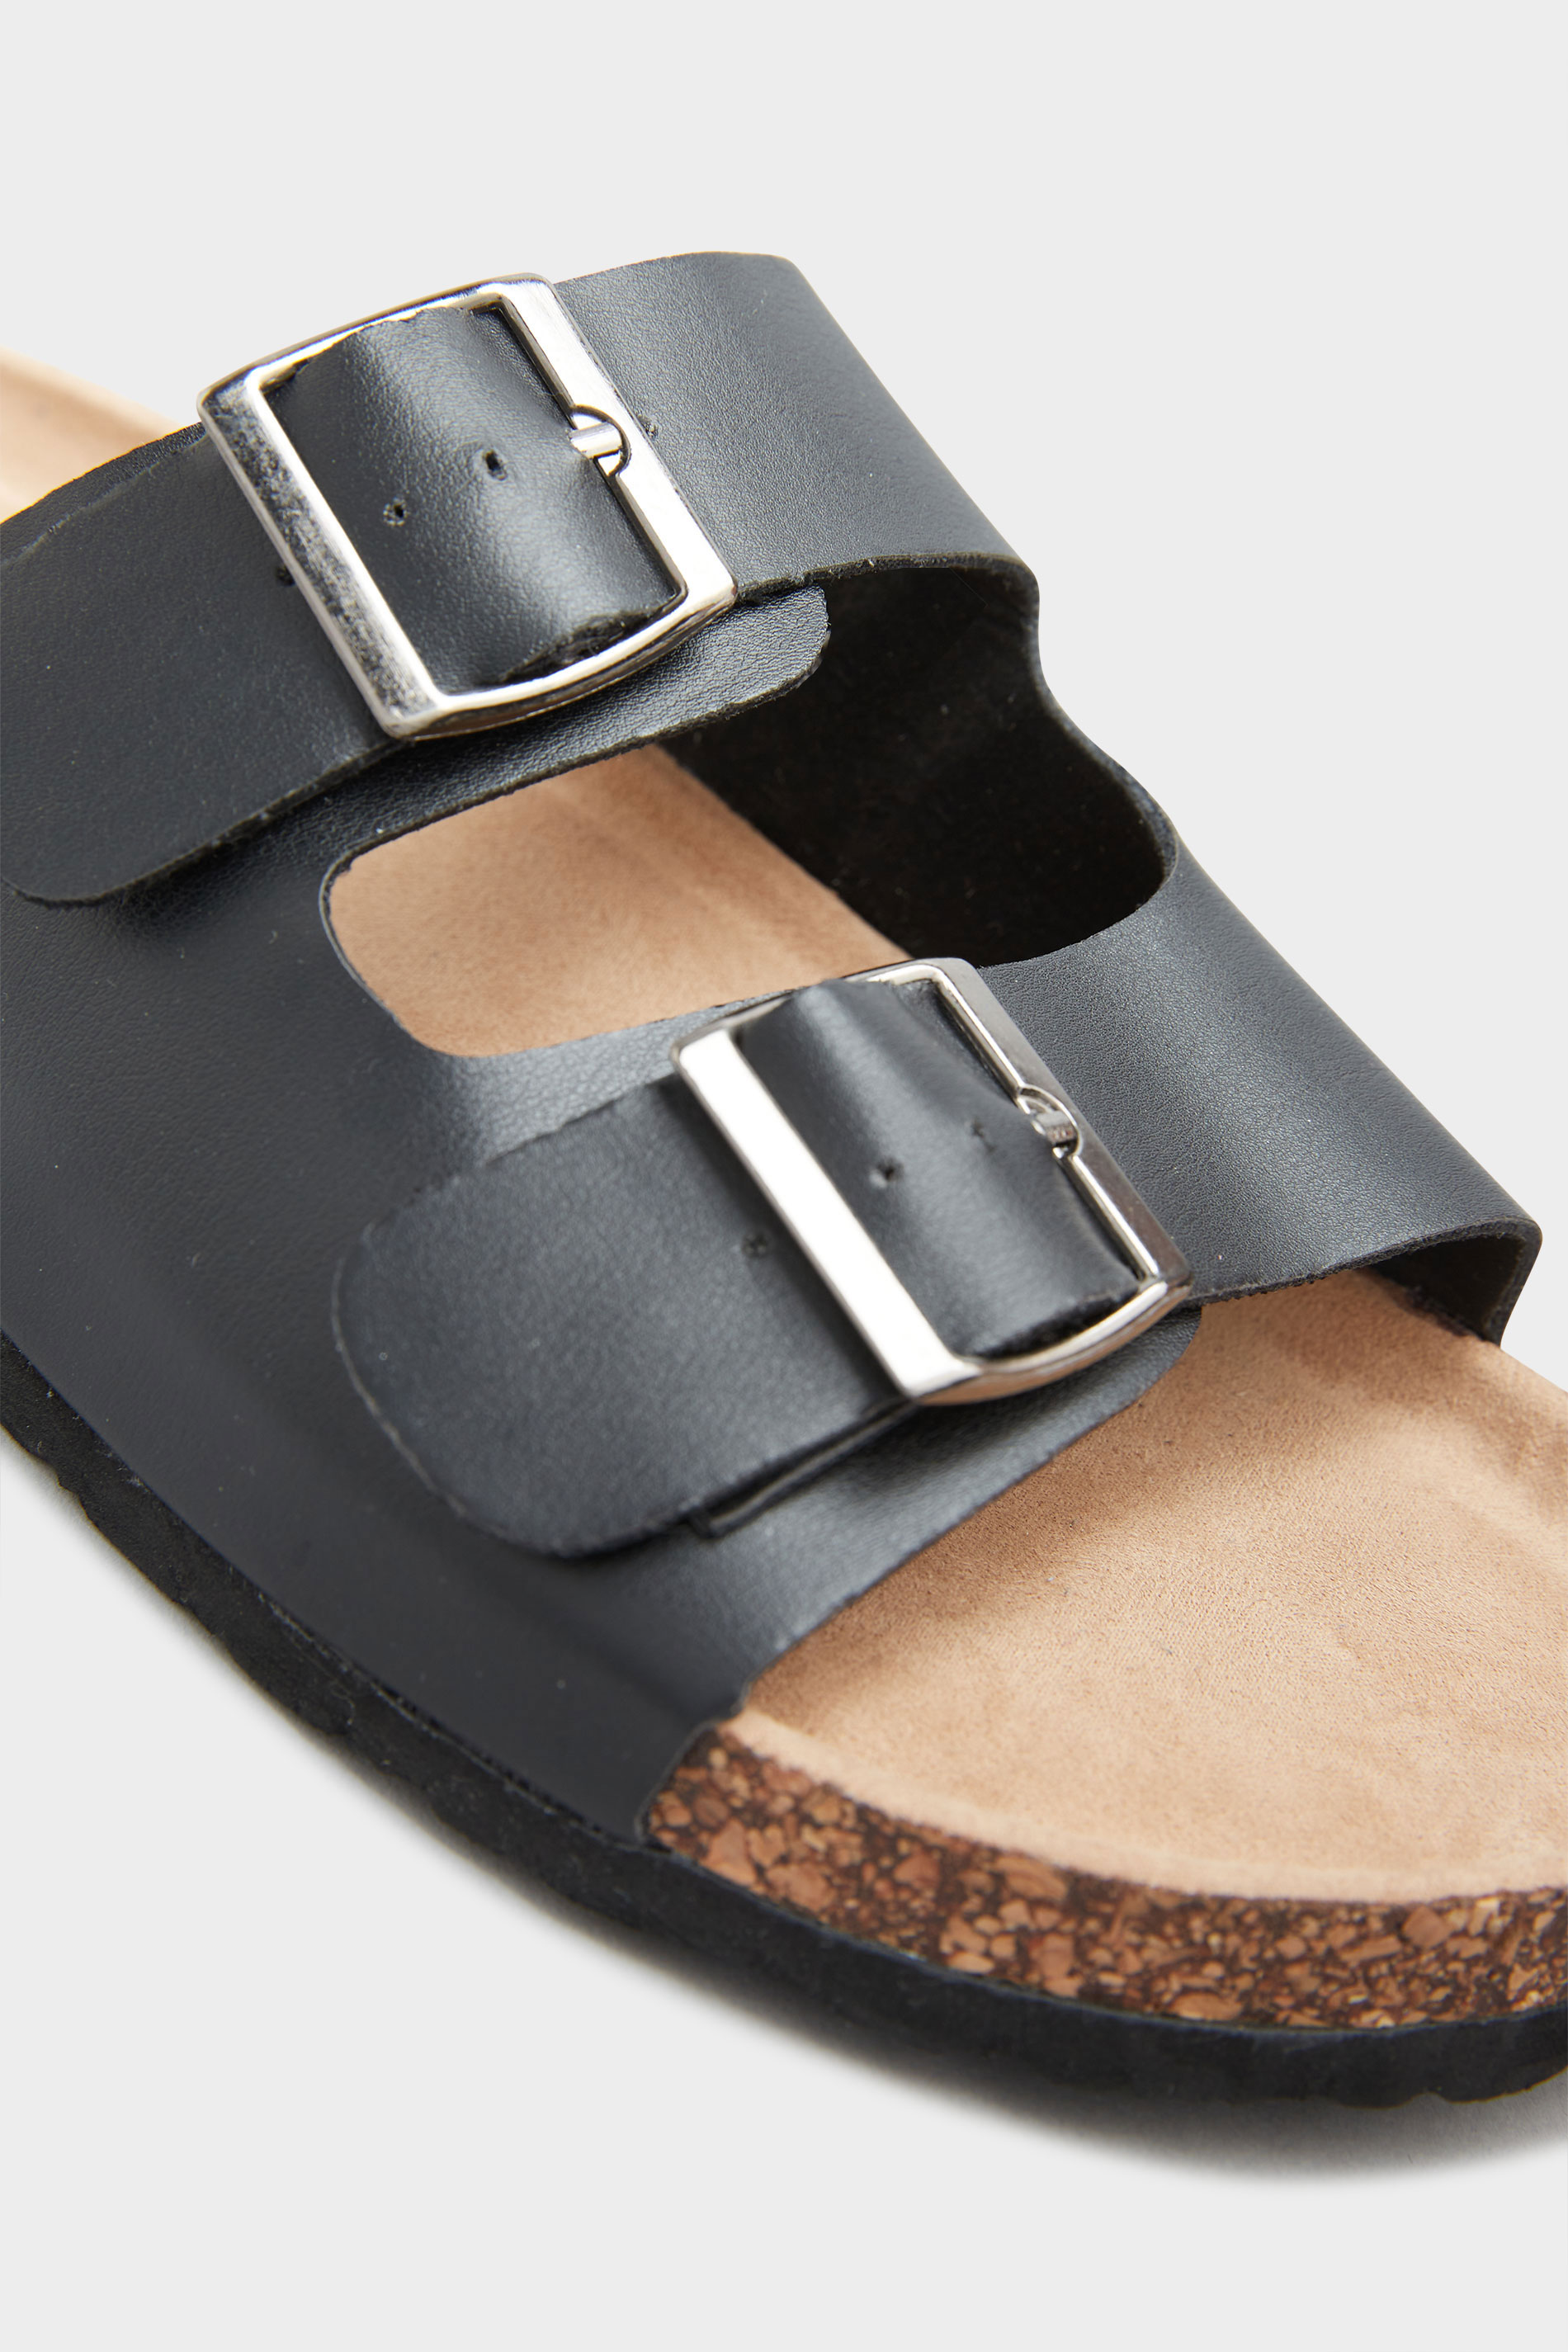 Black Buckle Strap Footbed Sandals In Extra Wide Fit | Long Tall Sally